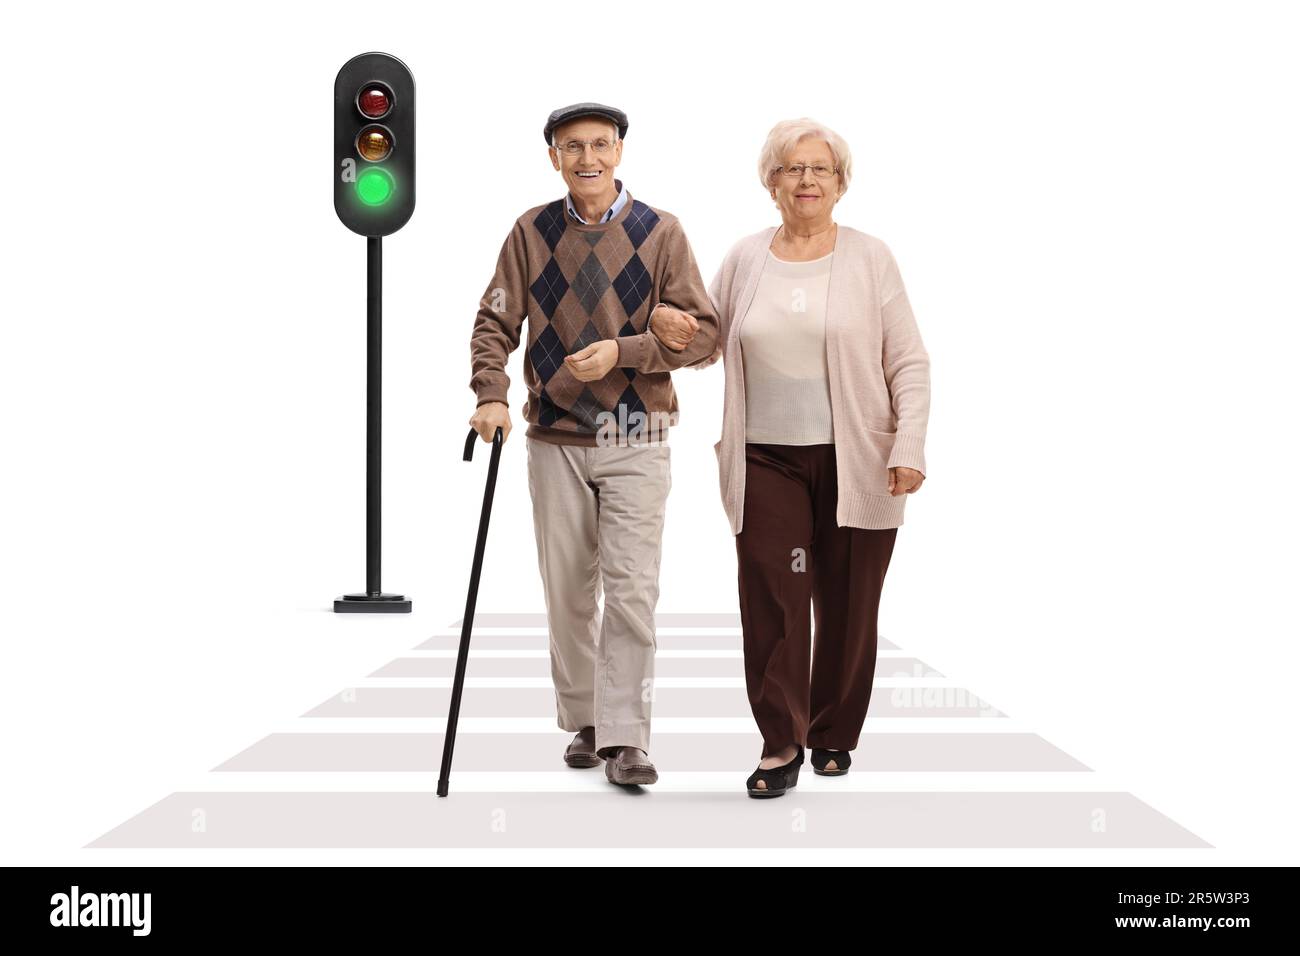 Full length portrait of an elderly man and woman walking at pedestrian crosswalk isolated on white background Stock Photo